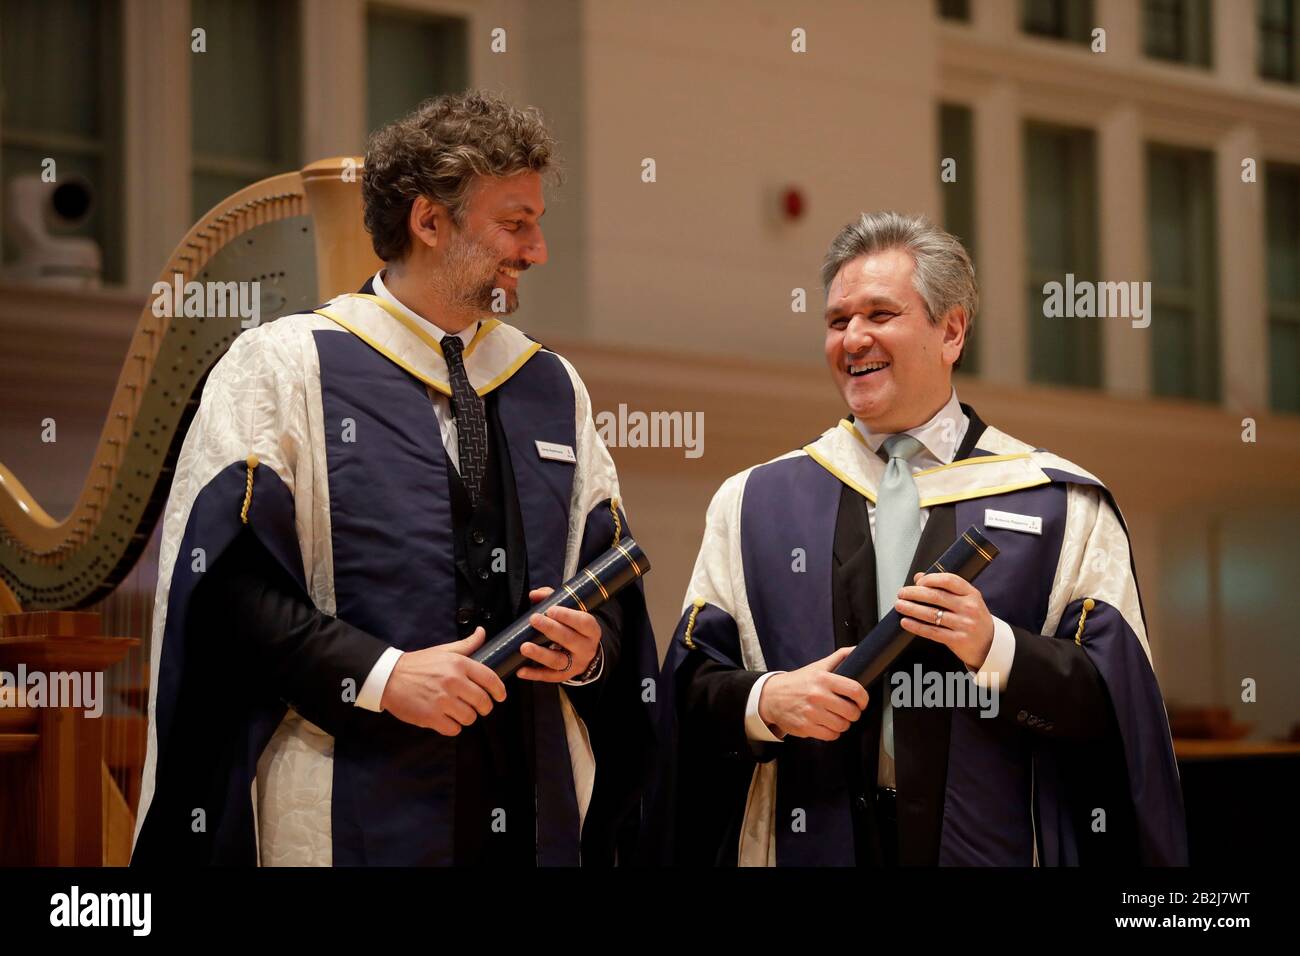 German operatic tenor Jonas Kaufmann, (left) and English-Italian conductor and pianist Sir Antonio Pappano stand together on stage after being presented with their honorary Doctor of Music awards by the Prince of Wales at the Royal College of Music's annual awards in London. Stock Photo